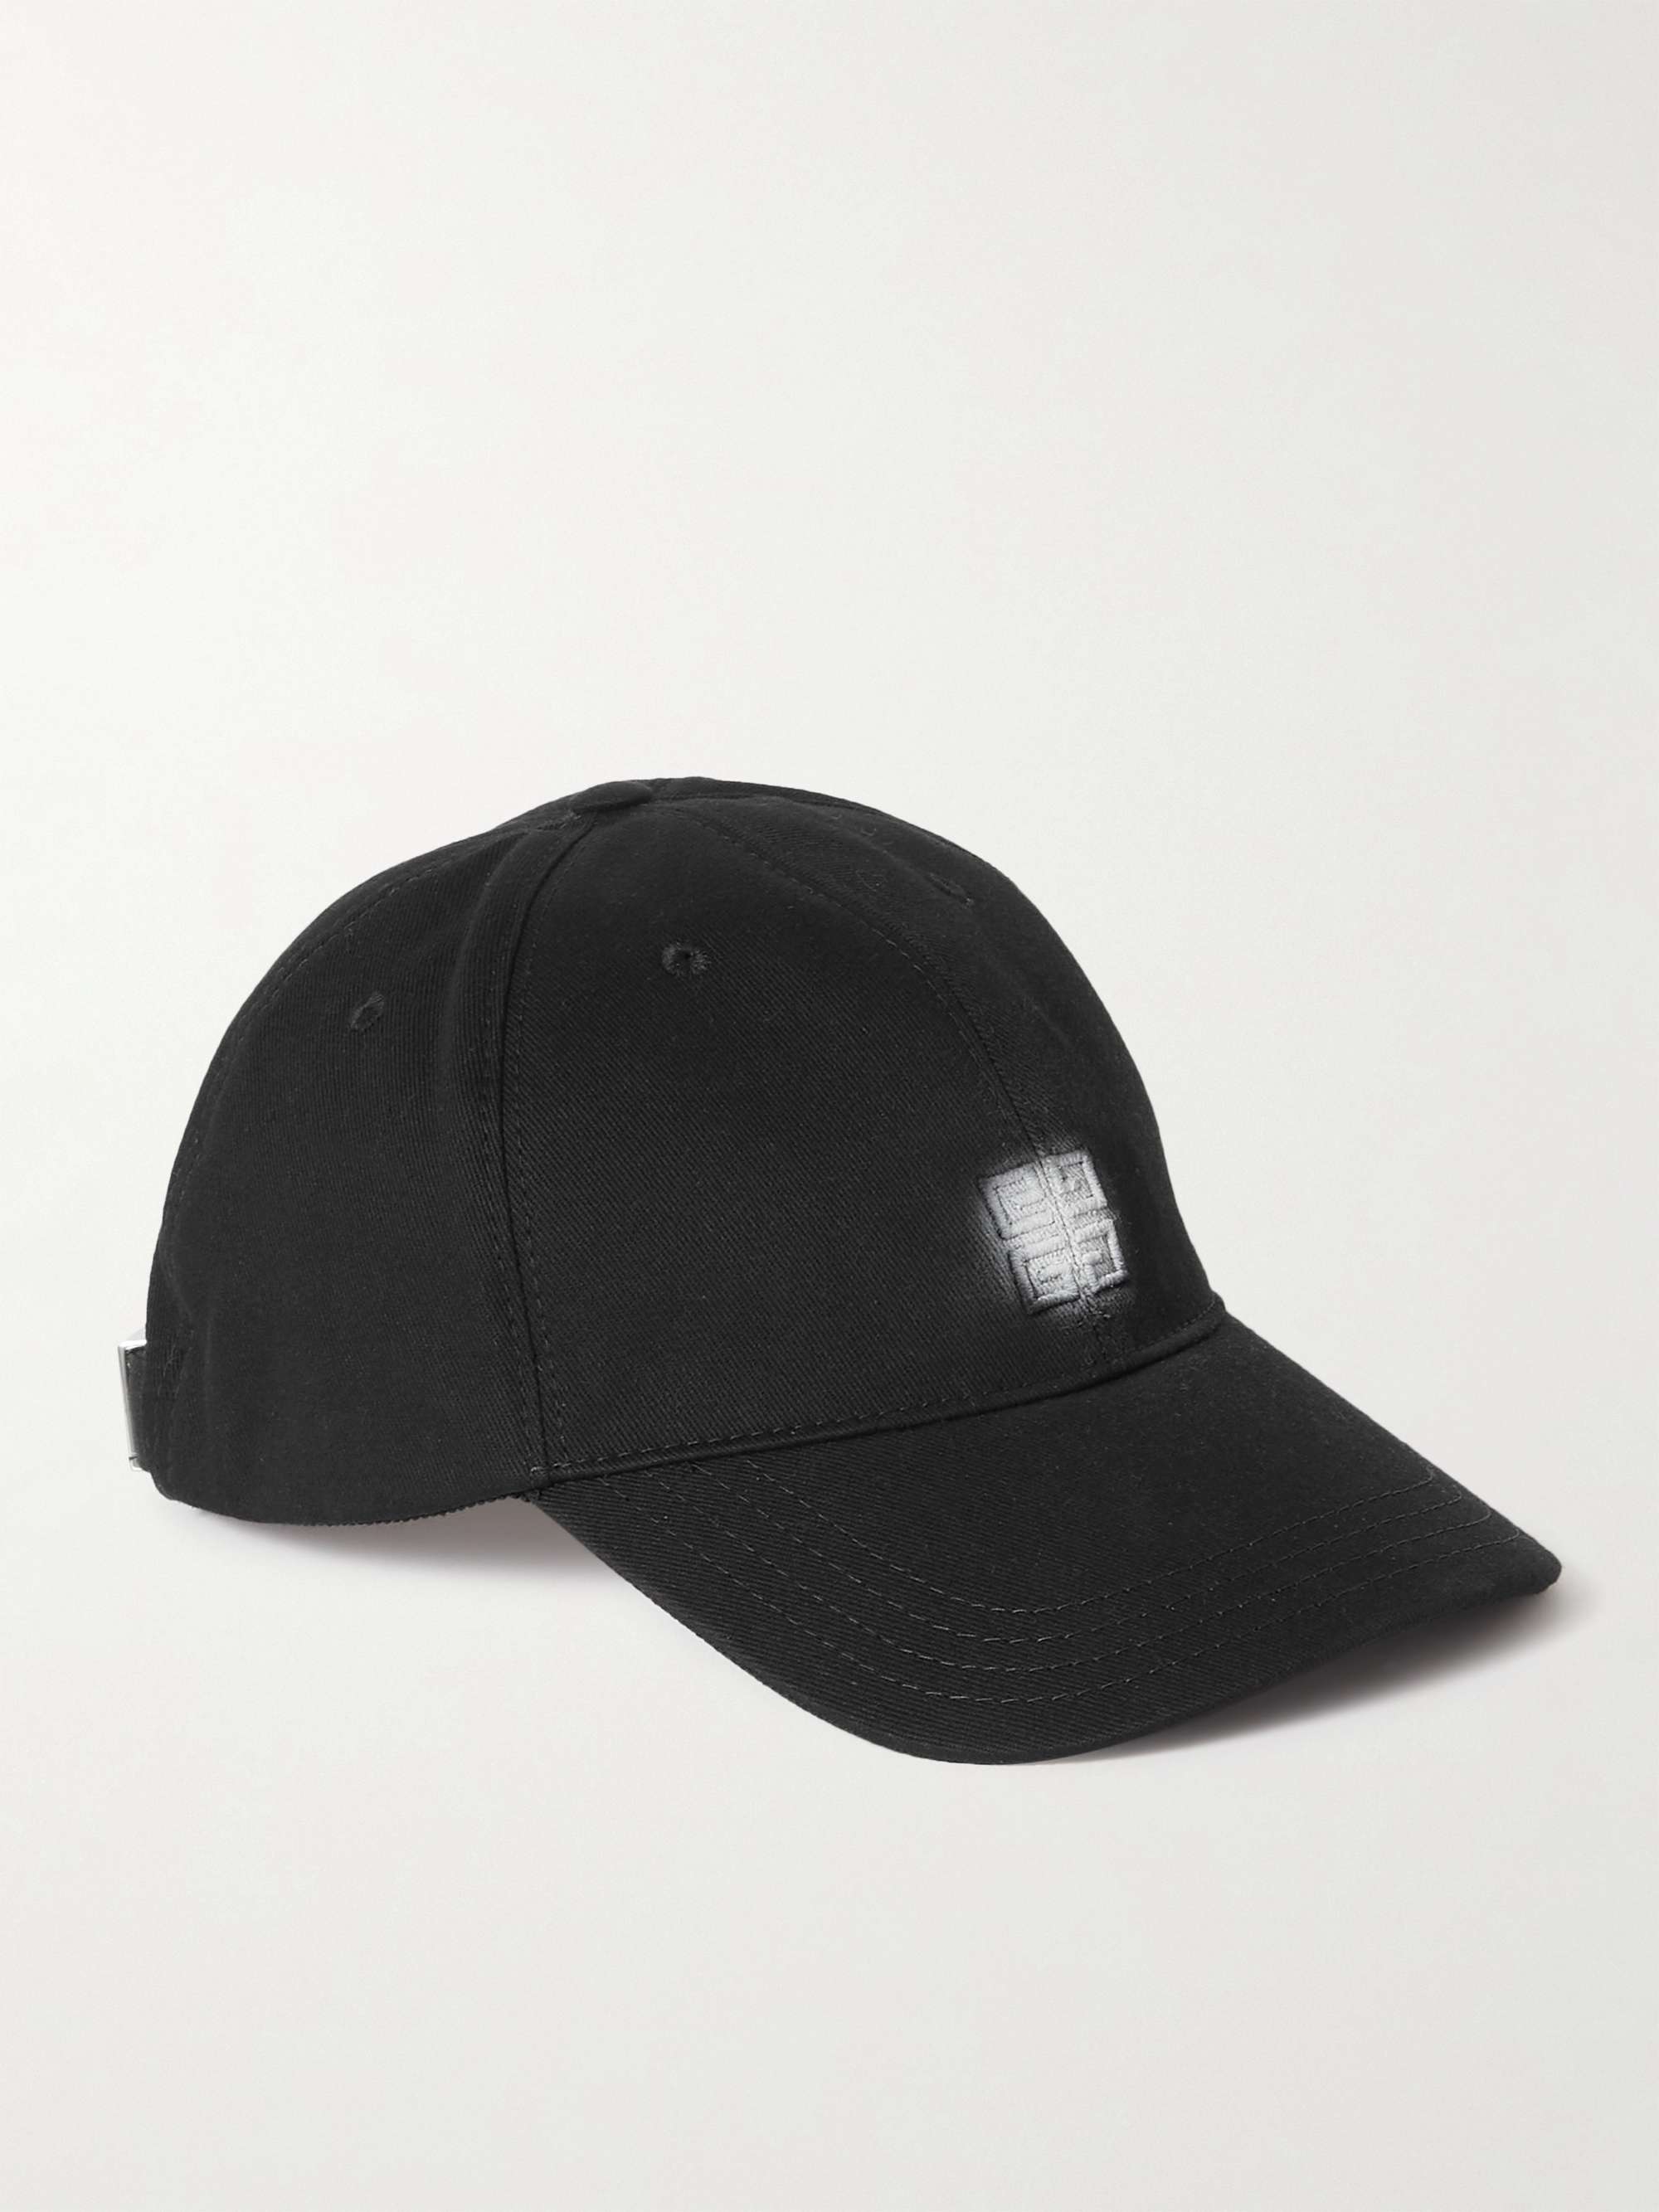 GIVENCHY Logo-Embroidered Cotton-Blend Twill Baseball Cap